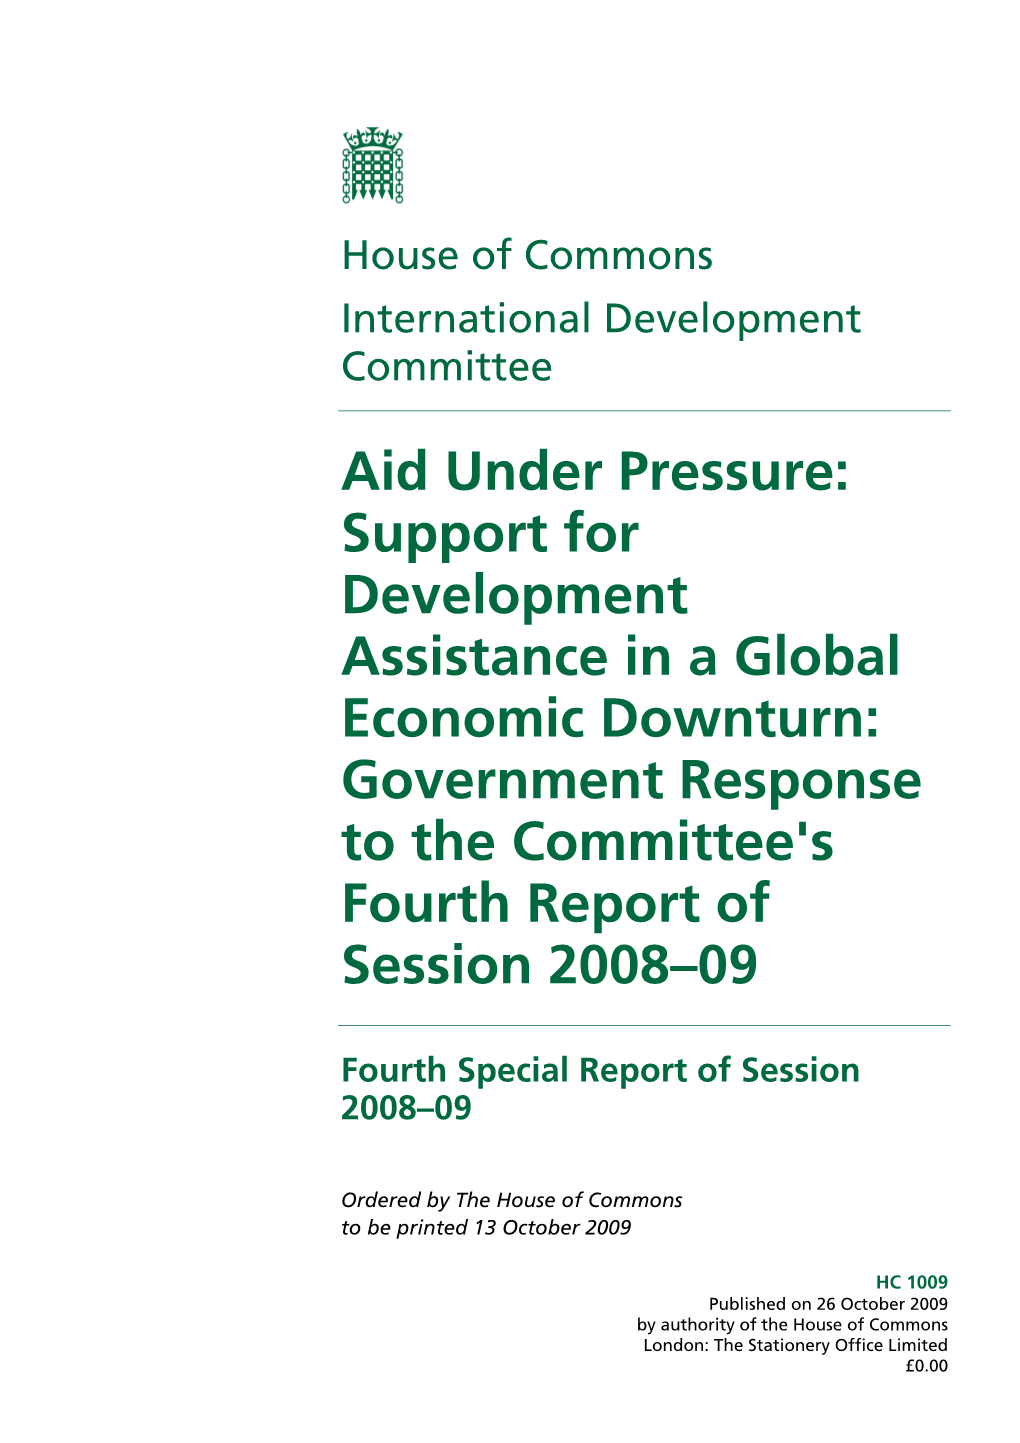 Support for Development Assistance in a Global Economic Downturn: Government Response to the Committee's Fourth Report of Session 2008–09